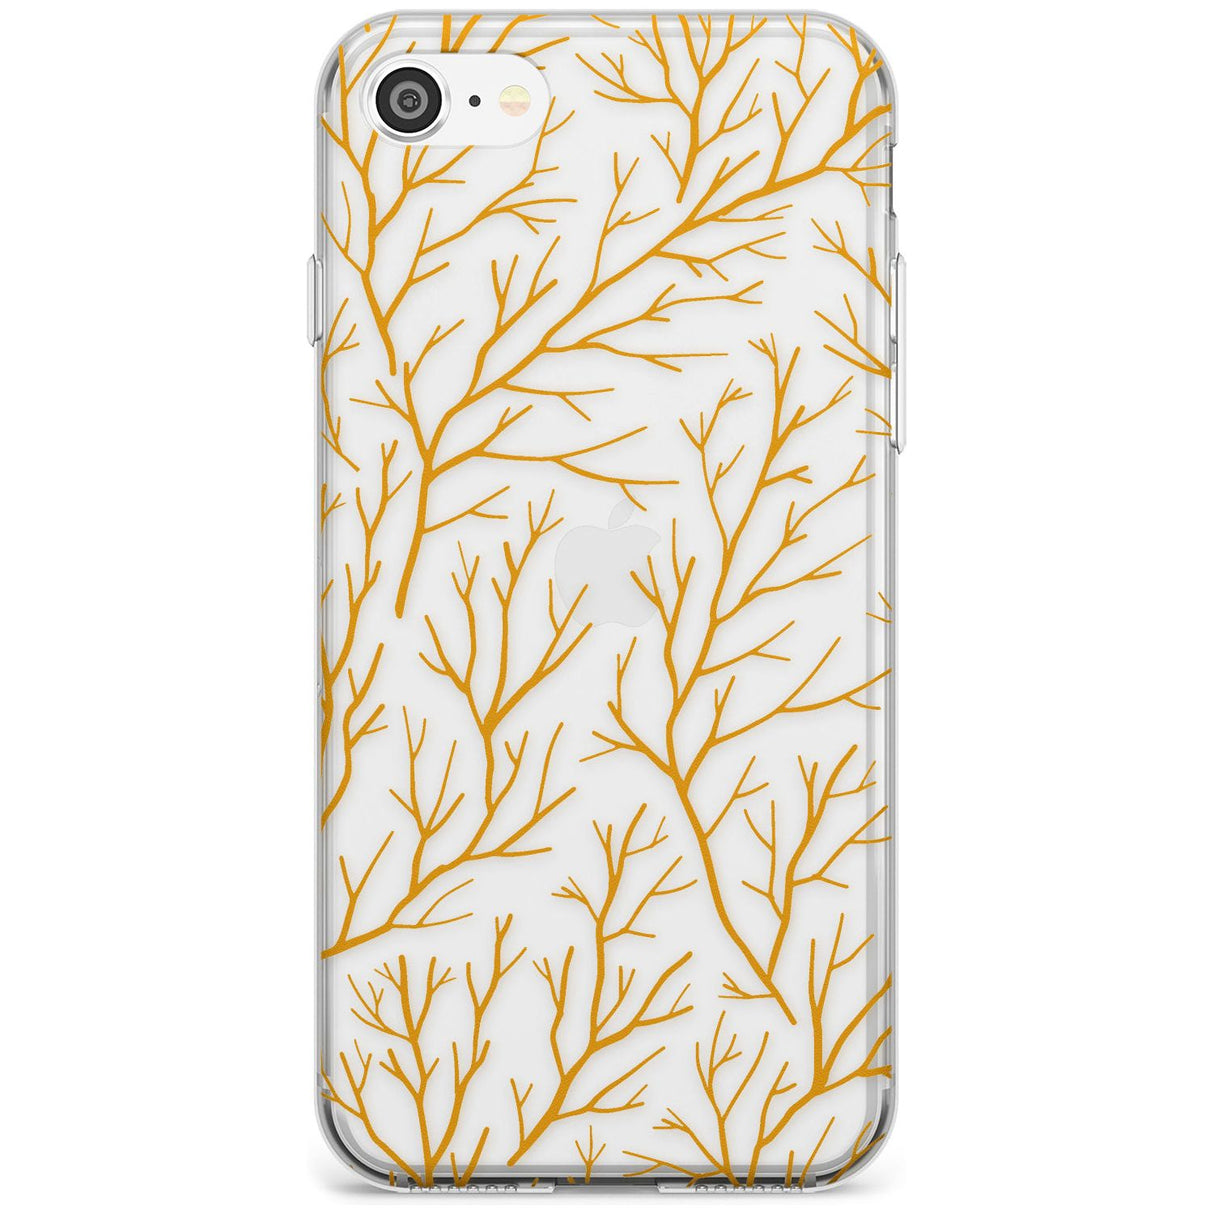 Personalised Bramble Branches Pattern Slim TPU Phone Case for iPhone SE 8 7 Plus